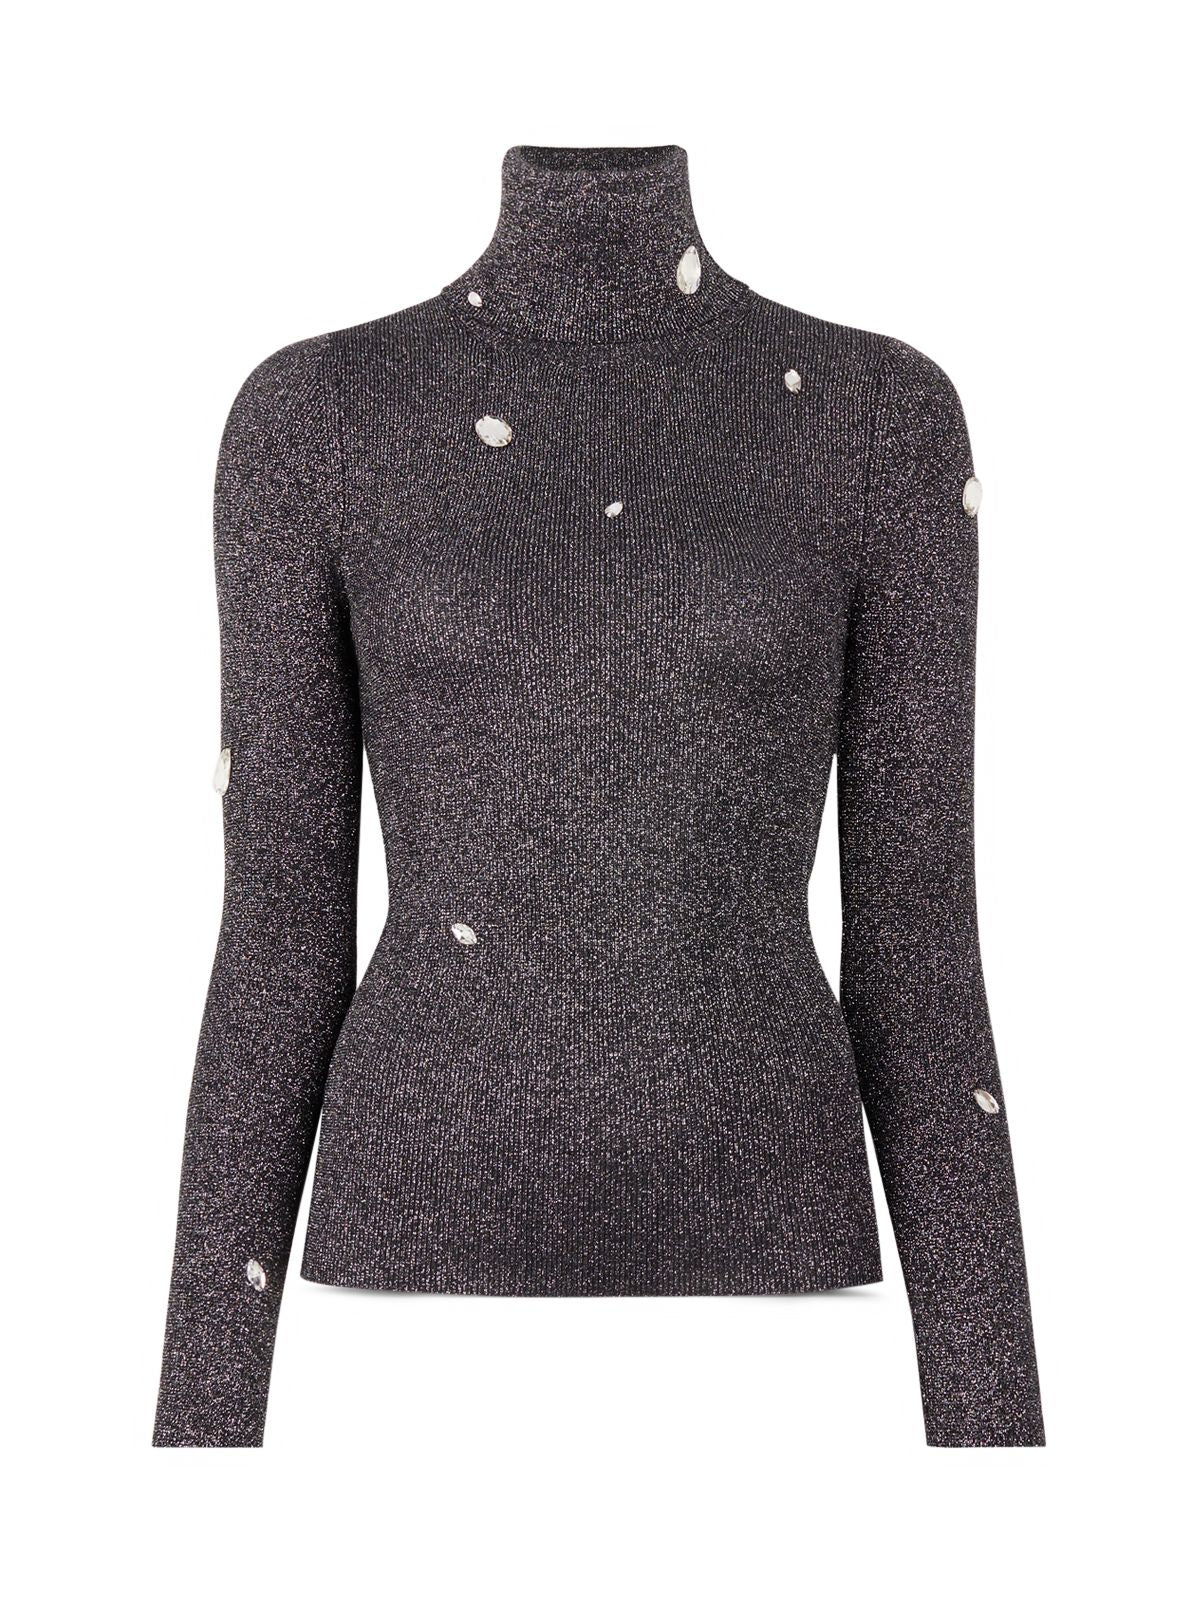 CHRISTOPHER KANE Womens Black Embellished Textured Unlined Fitted Long Sleeve Turtle Neck Cocktail Sweater XS